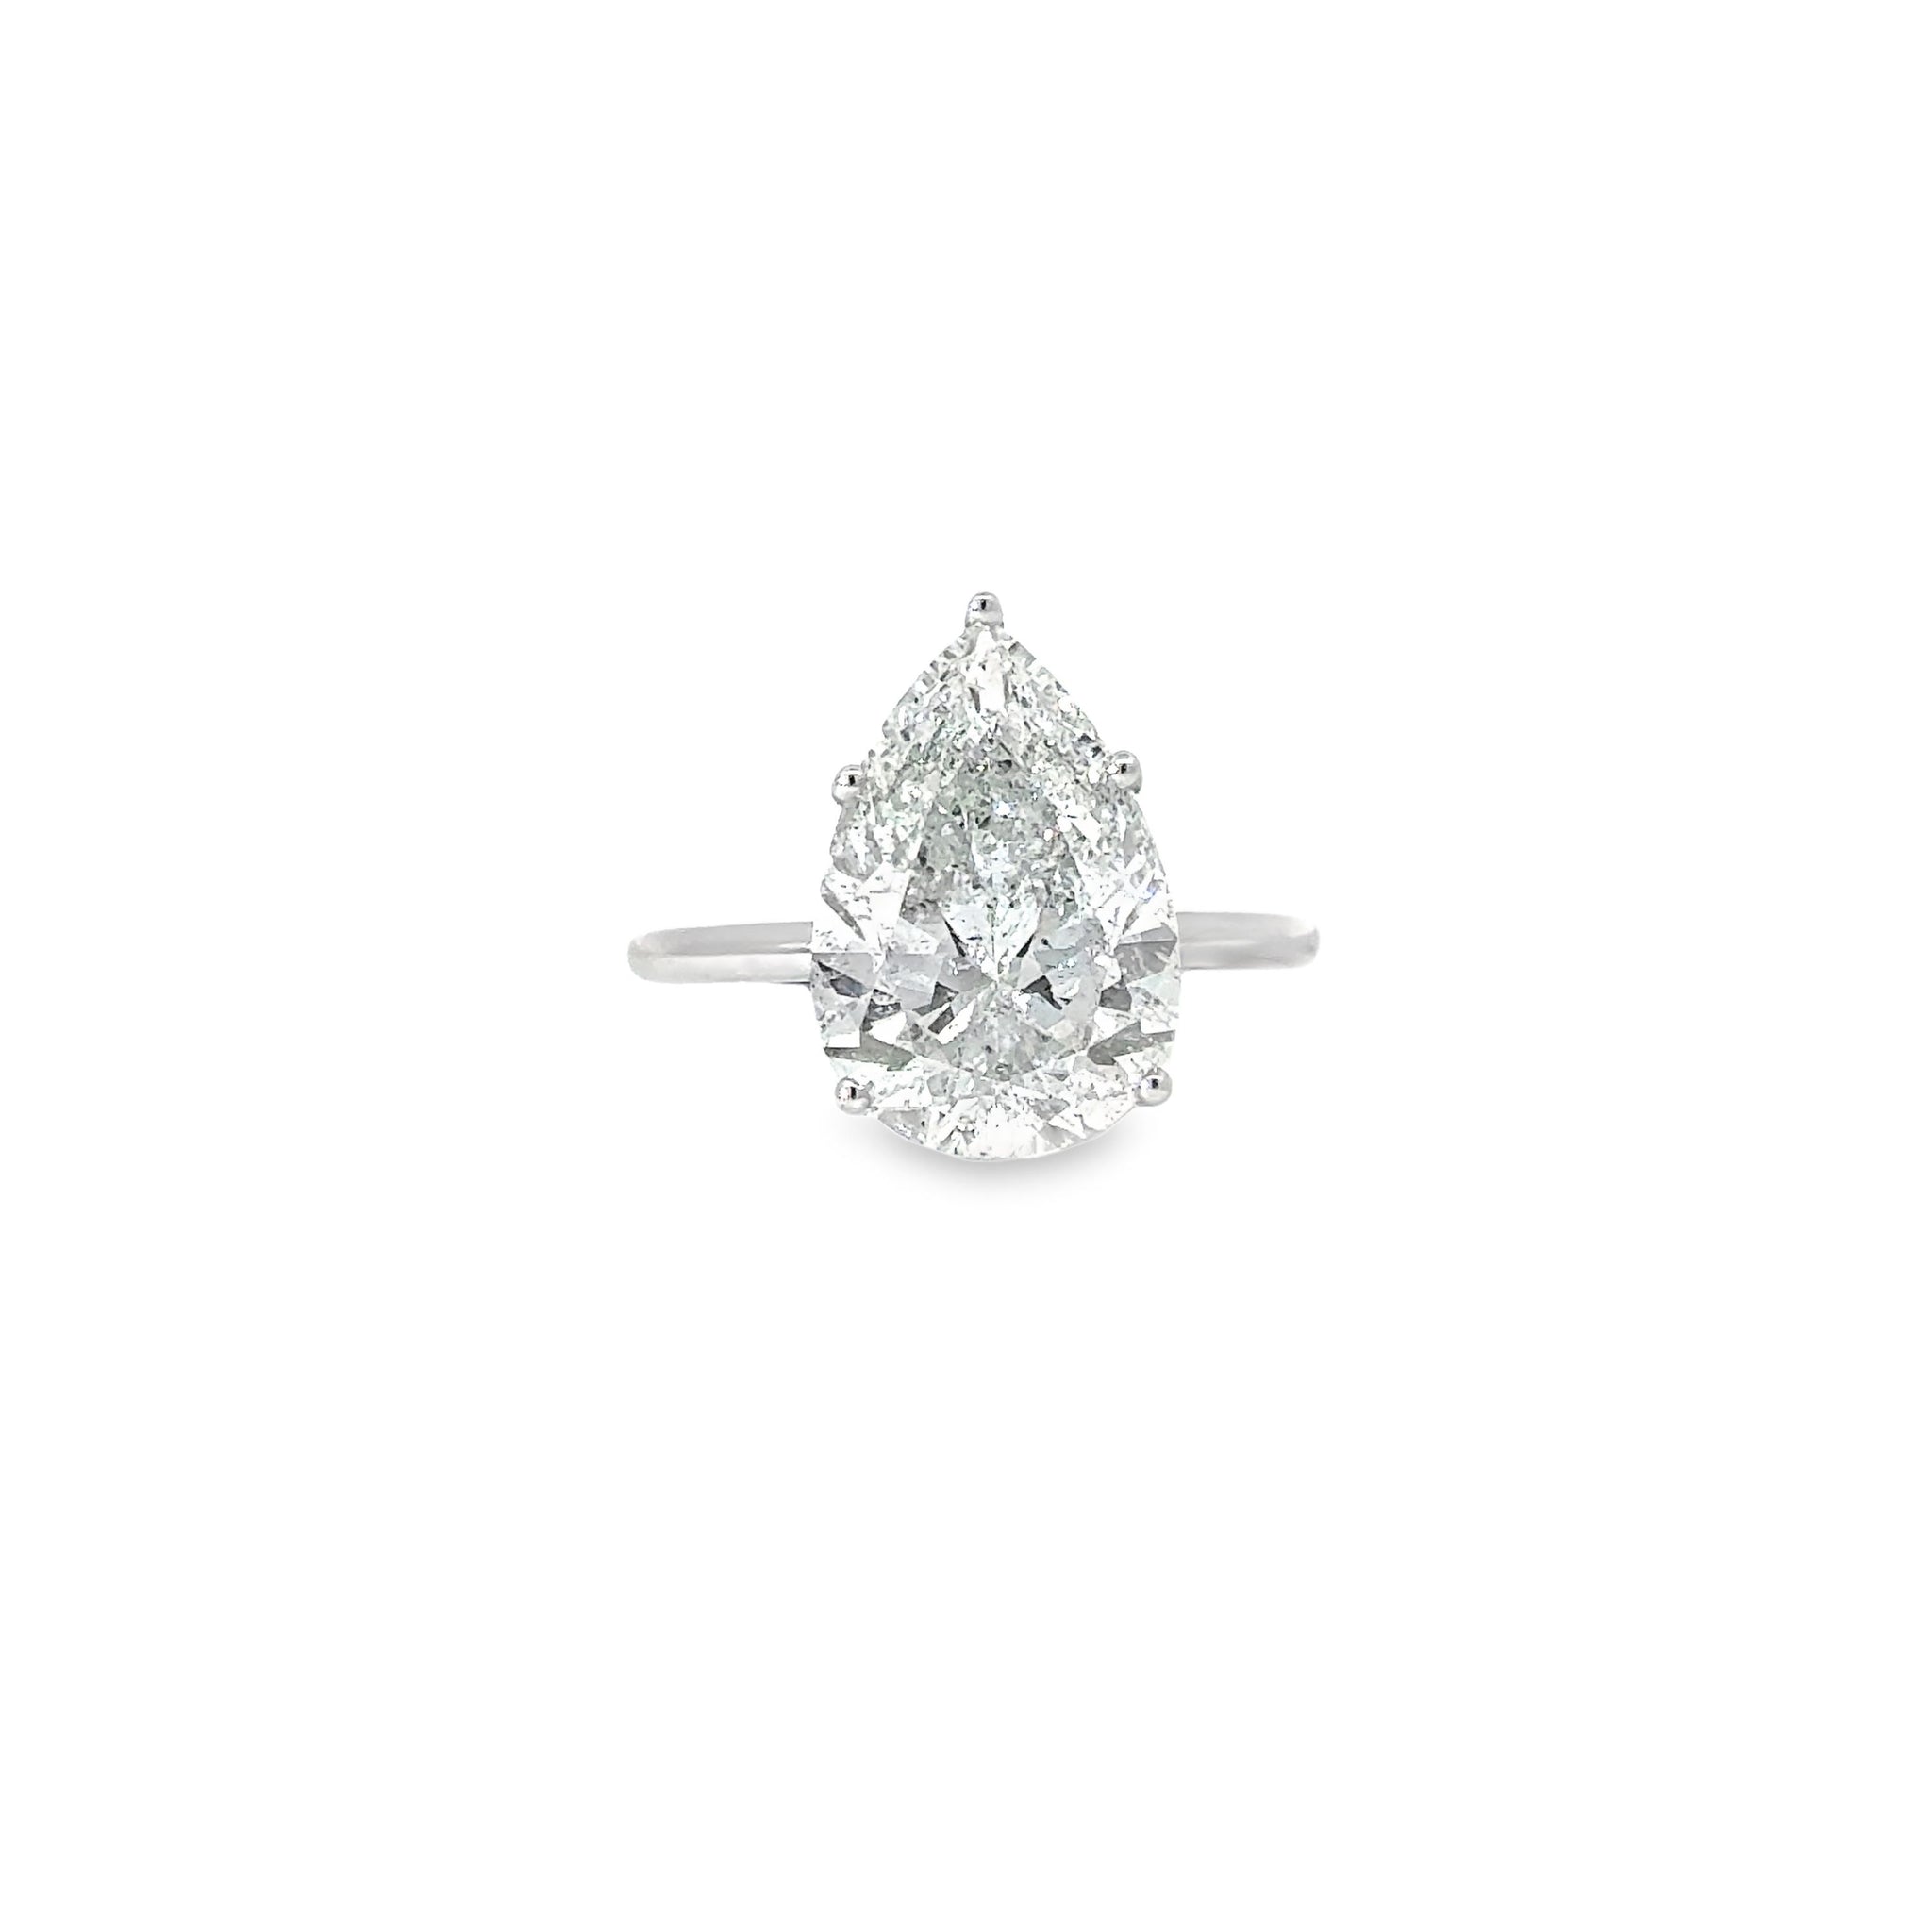 18k White Gold 5.33ct Pear Shape Diamond Solitaire Ring